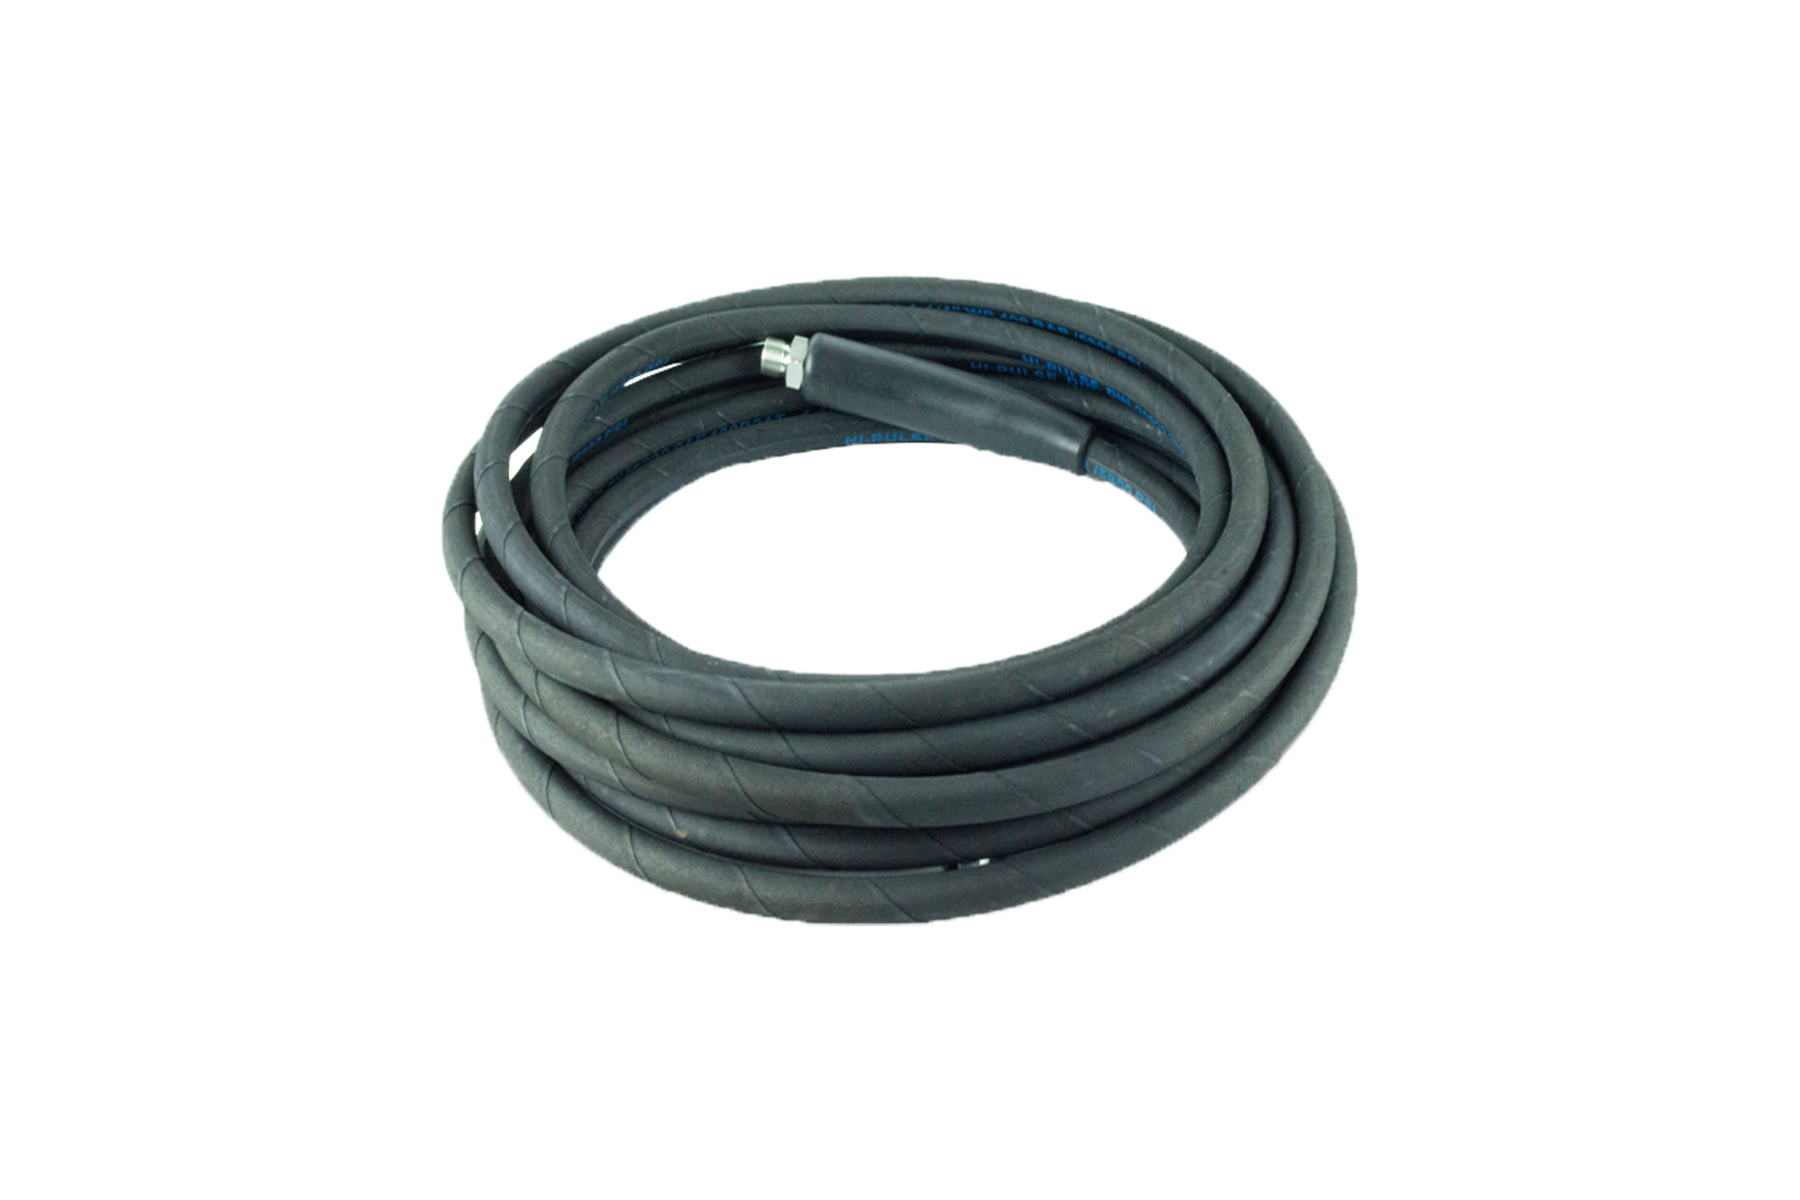 5m Double Wired HP Hose 3/8" M/F, Large 12mm Bore